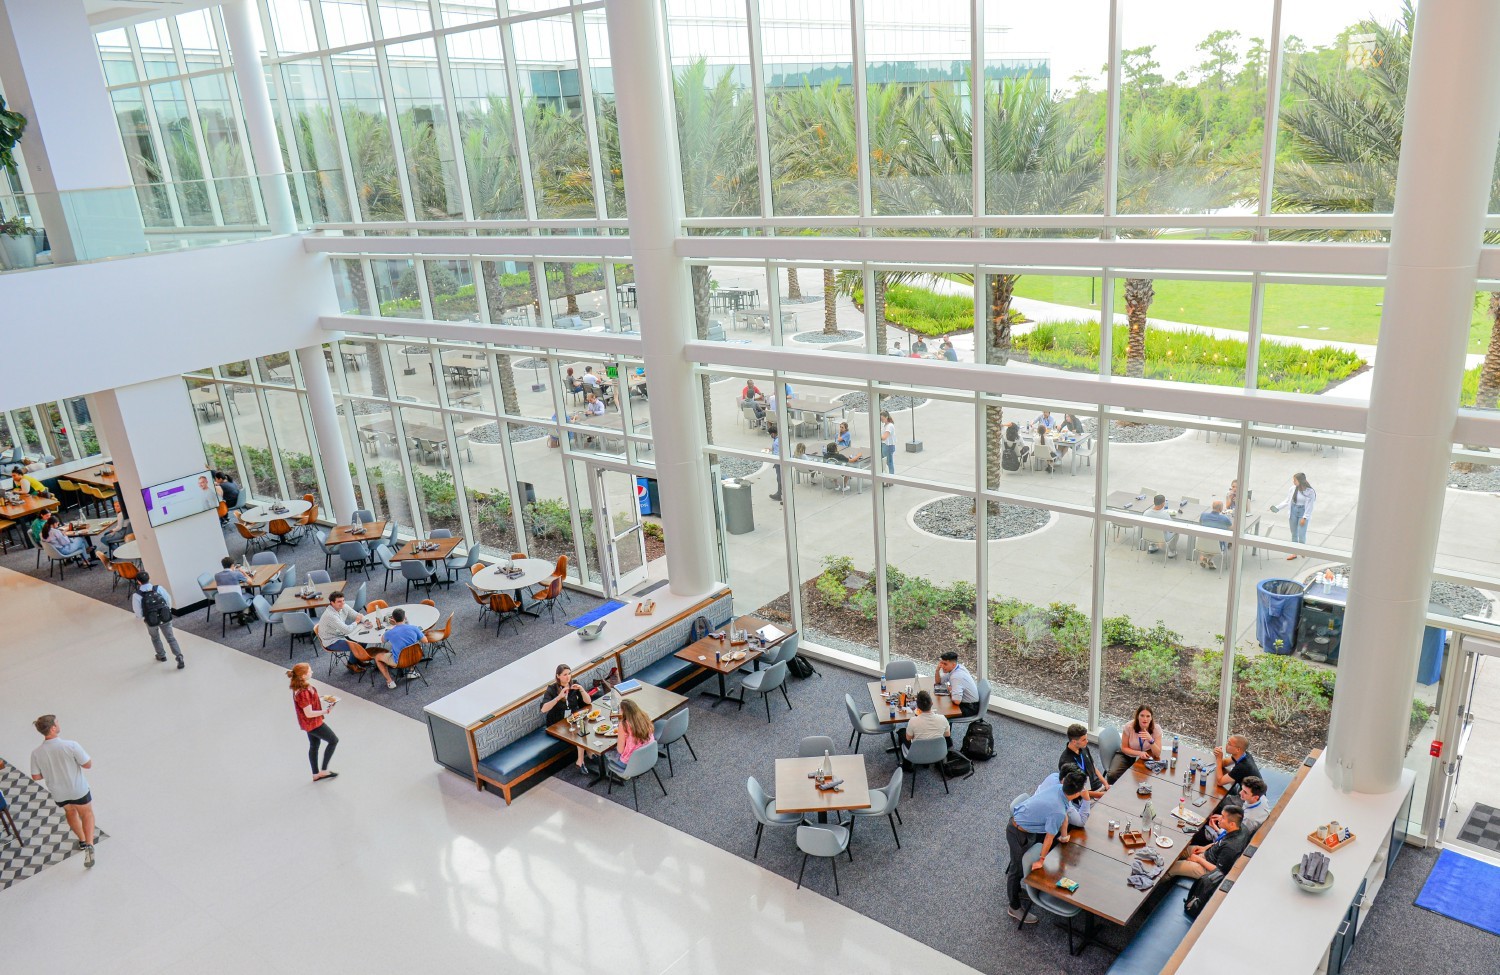 KPMG Lakehouse in Lake Nona, Florida is the firm's state-of-the-art learning and innovation center and cultural home.